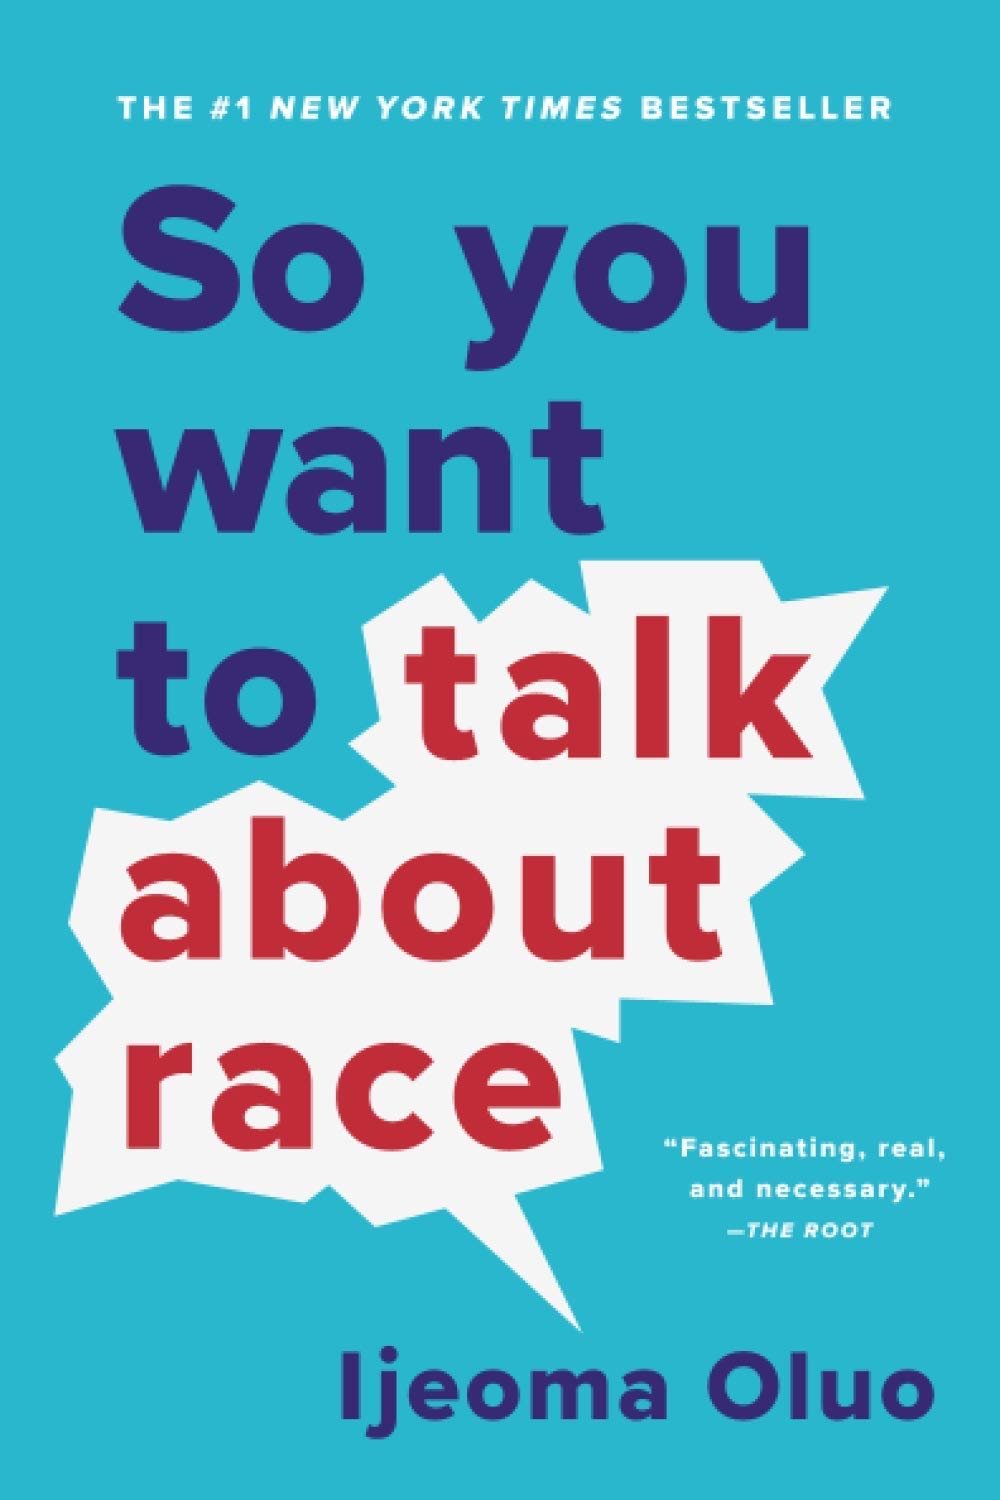 Book cover of So You Want to Talk About Race by Ijeoma Oluo.